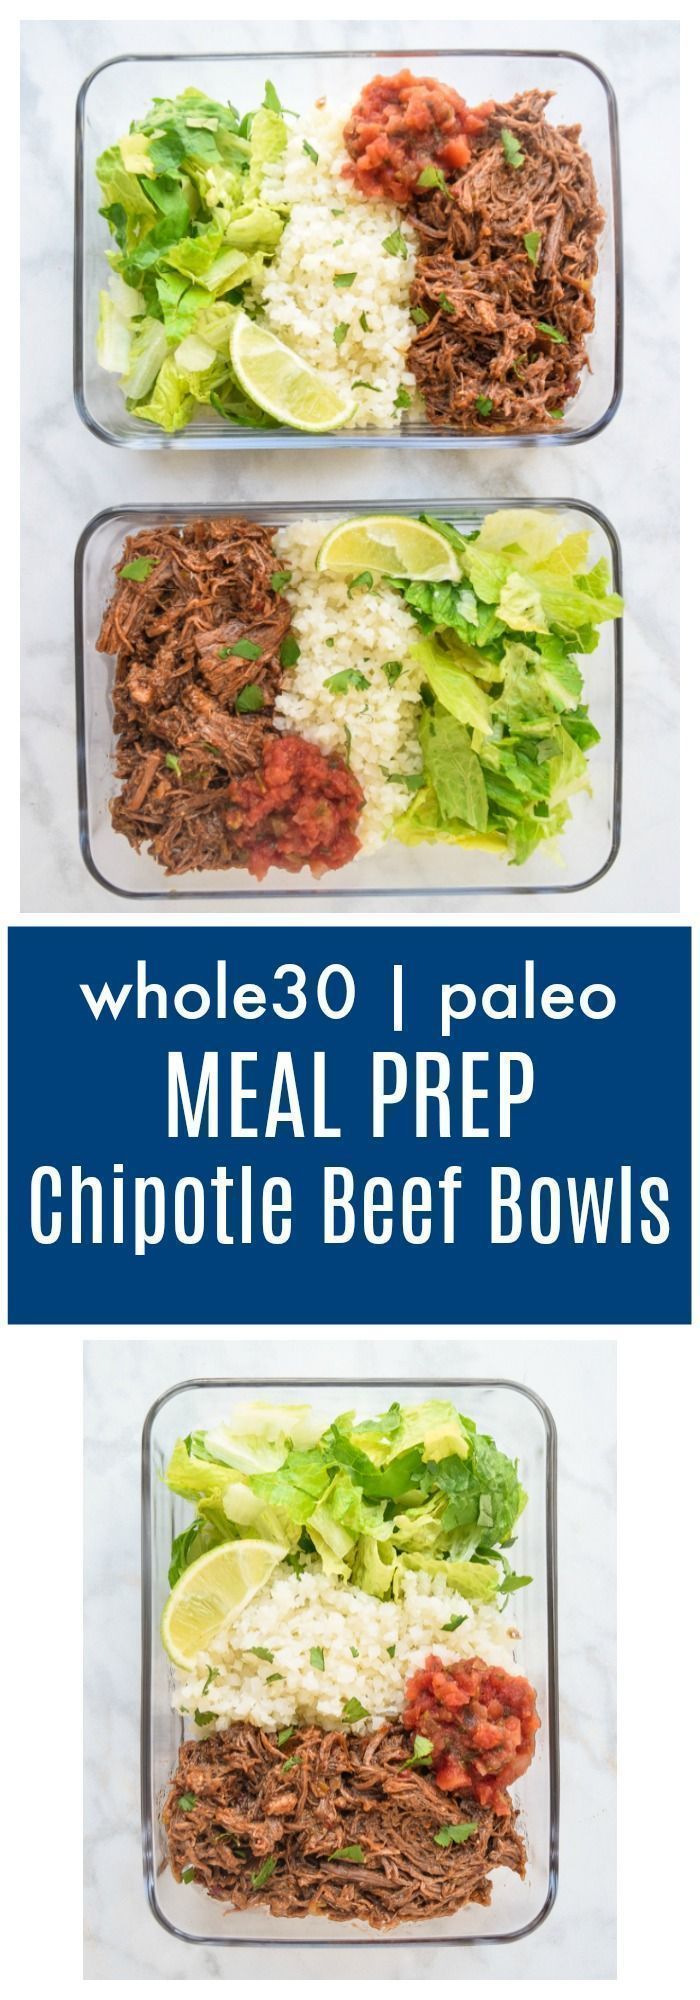 Meal Prep Chipotle Beef Bowls (Whole30 Paleo) - lunch has never been tastier with these meal prep chipotle beef bowls!  Just like your favorite Mexican takeout and Whole30 complaint! | tastythin.com -   24 whole 30 aldi
 ideas